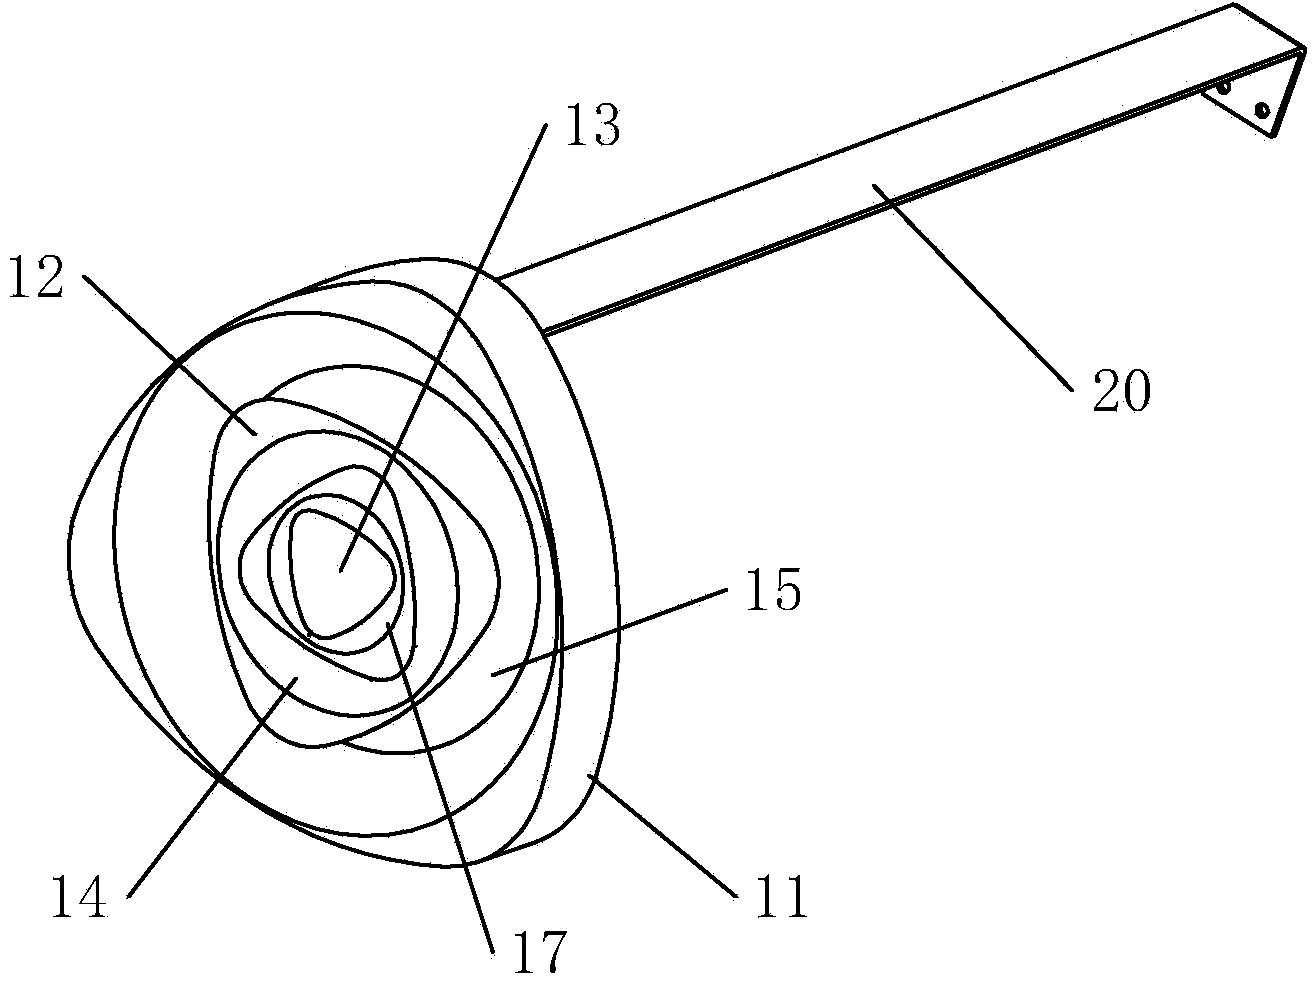 Inserted electric connection structure and charging power supply assembly